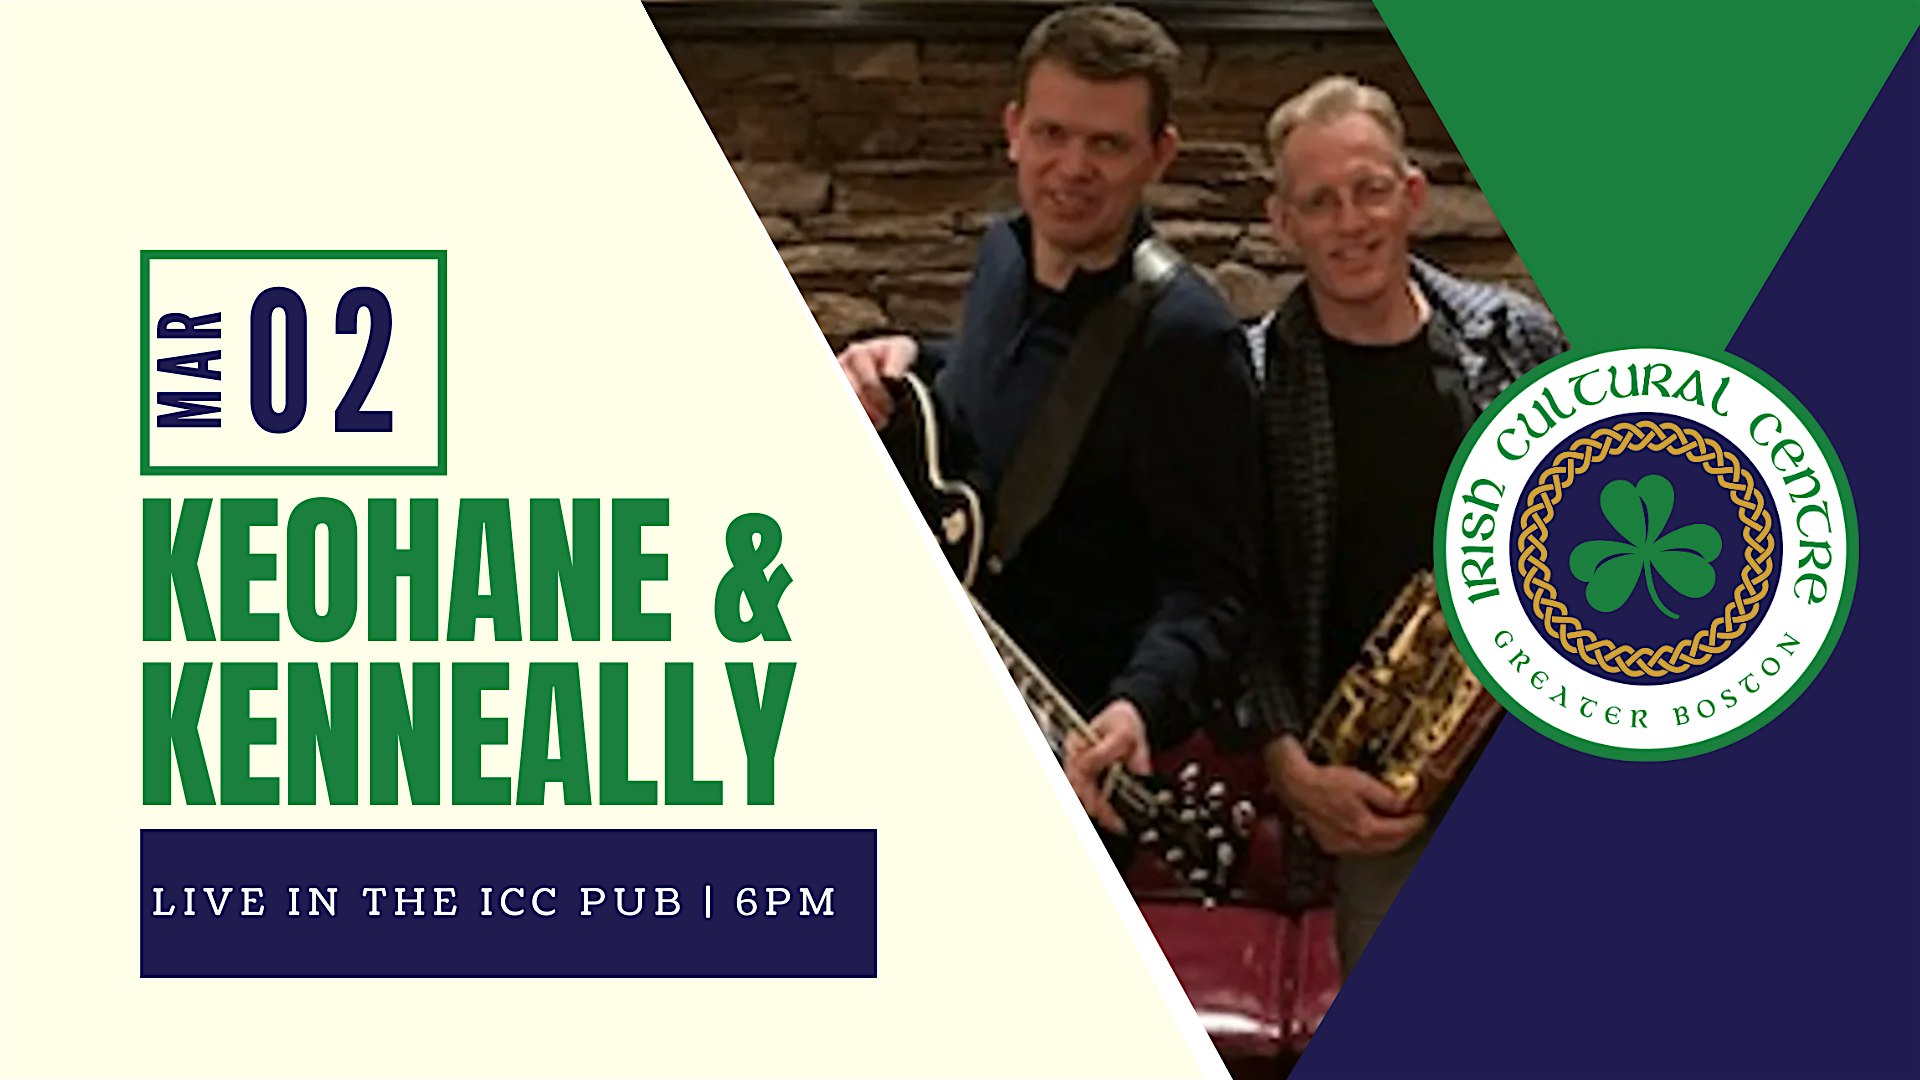 Keohane & Kenneally Live Music in the ICC Pub!